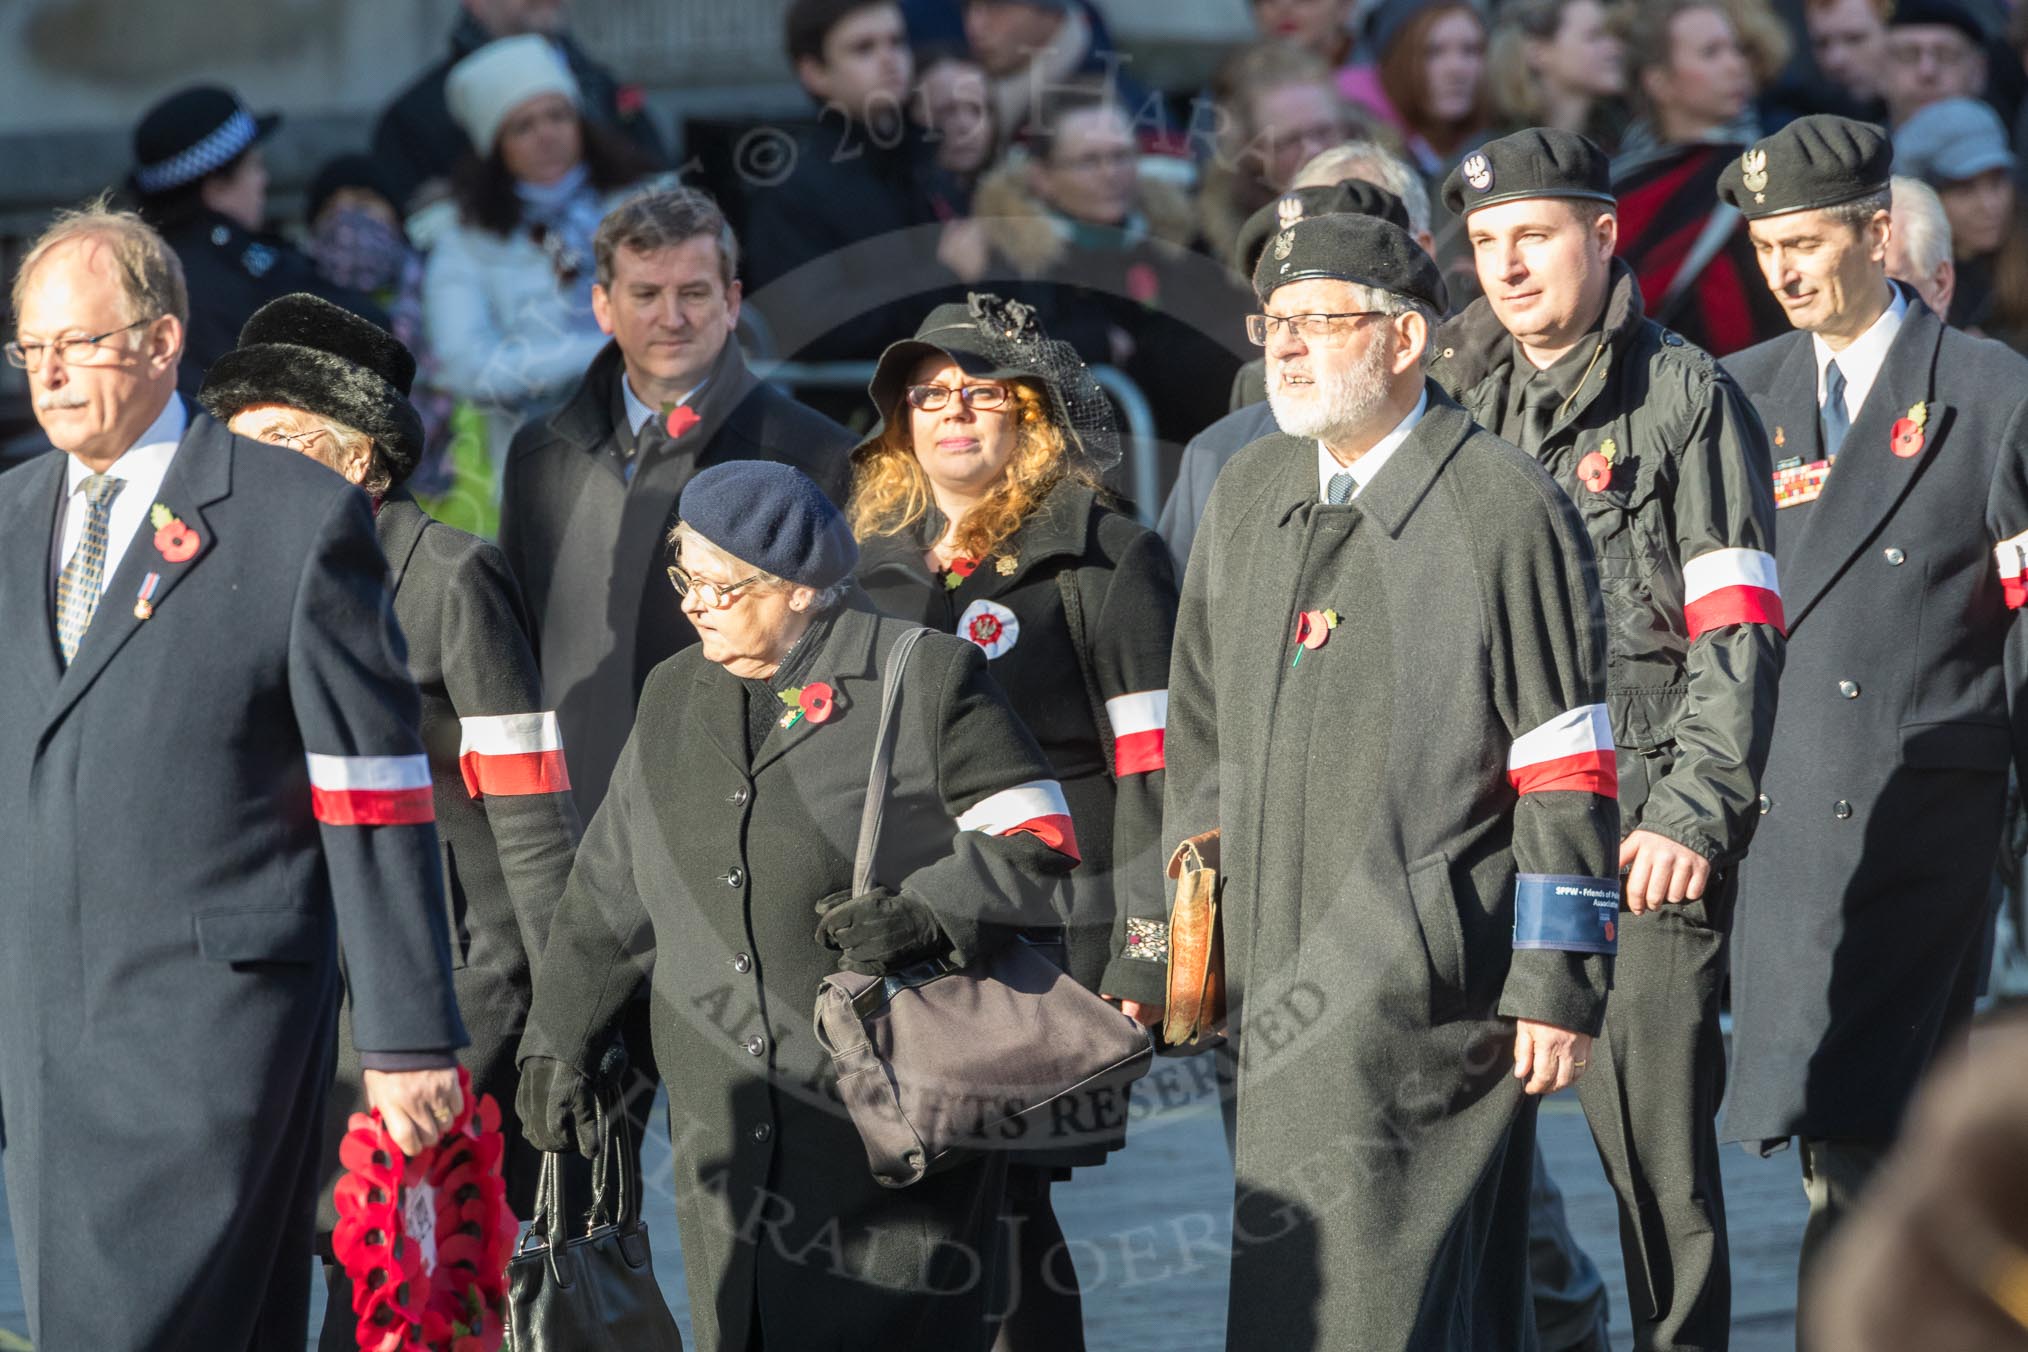 March Past, Remembrance Sunday at the Cenotaph 2016: M42 SPPW - Friends of Polish Veterans Association.
Cenotaph, Whitehall, London SW1,
London,
Greater London,
United Kingdom,
on 13 November 2016 at 13:19, image #2974